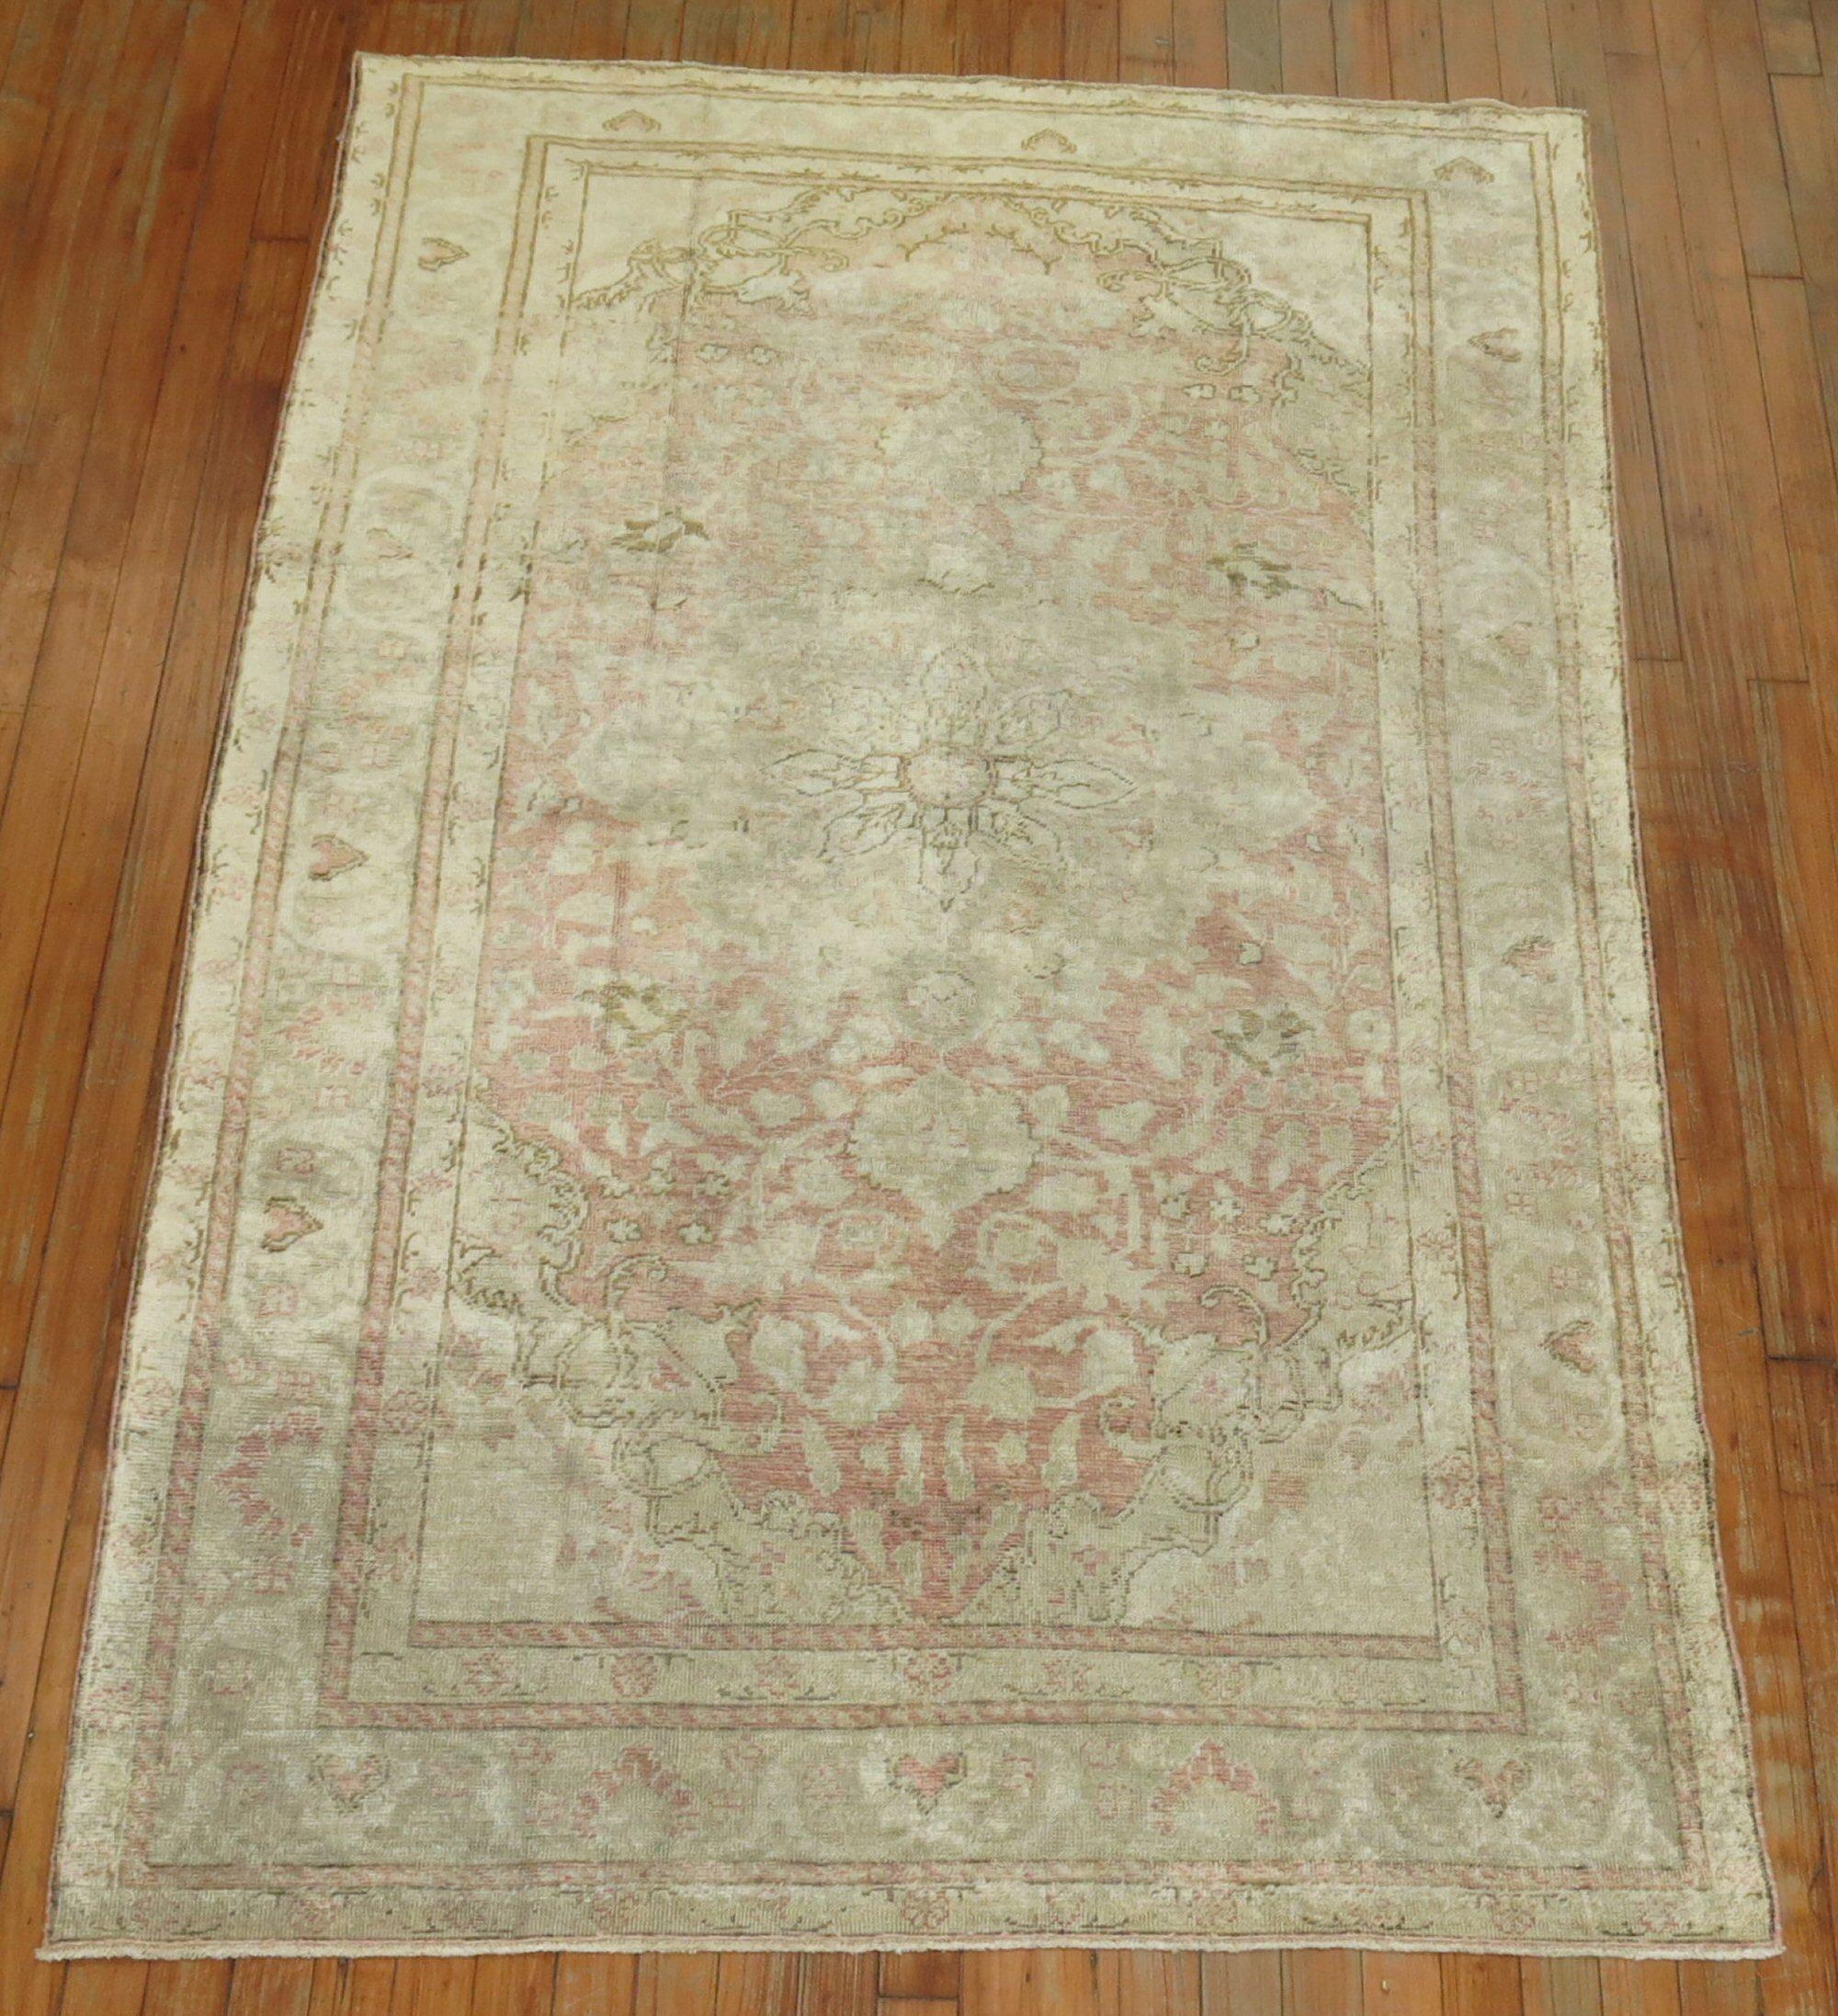 Accent size city weave Turkish rug in a predominant Pale Pink Tone. It has a formal and feminine feel to it. Measures: 4'2'' x 6'7''.